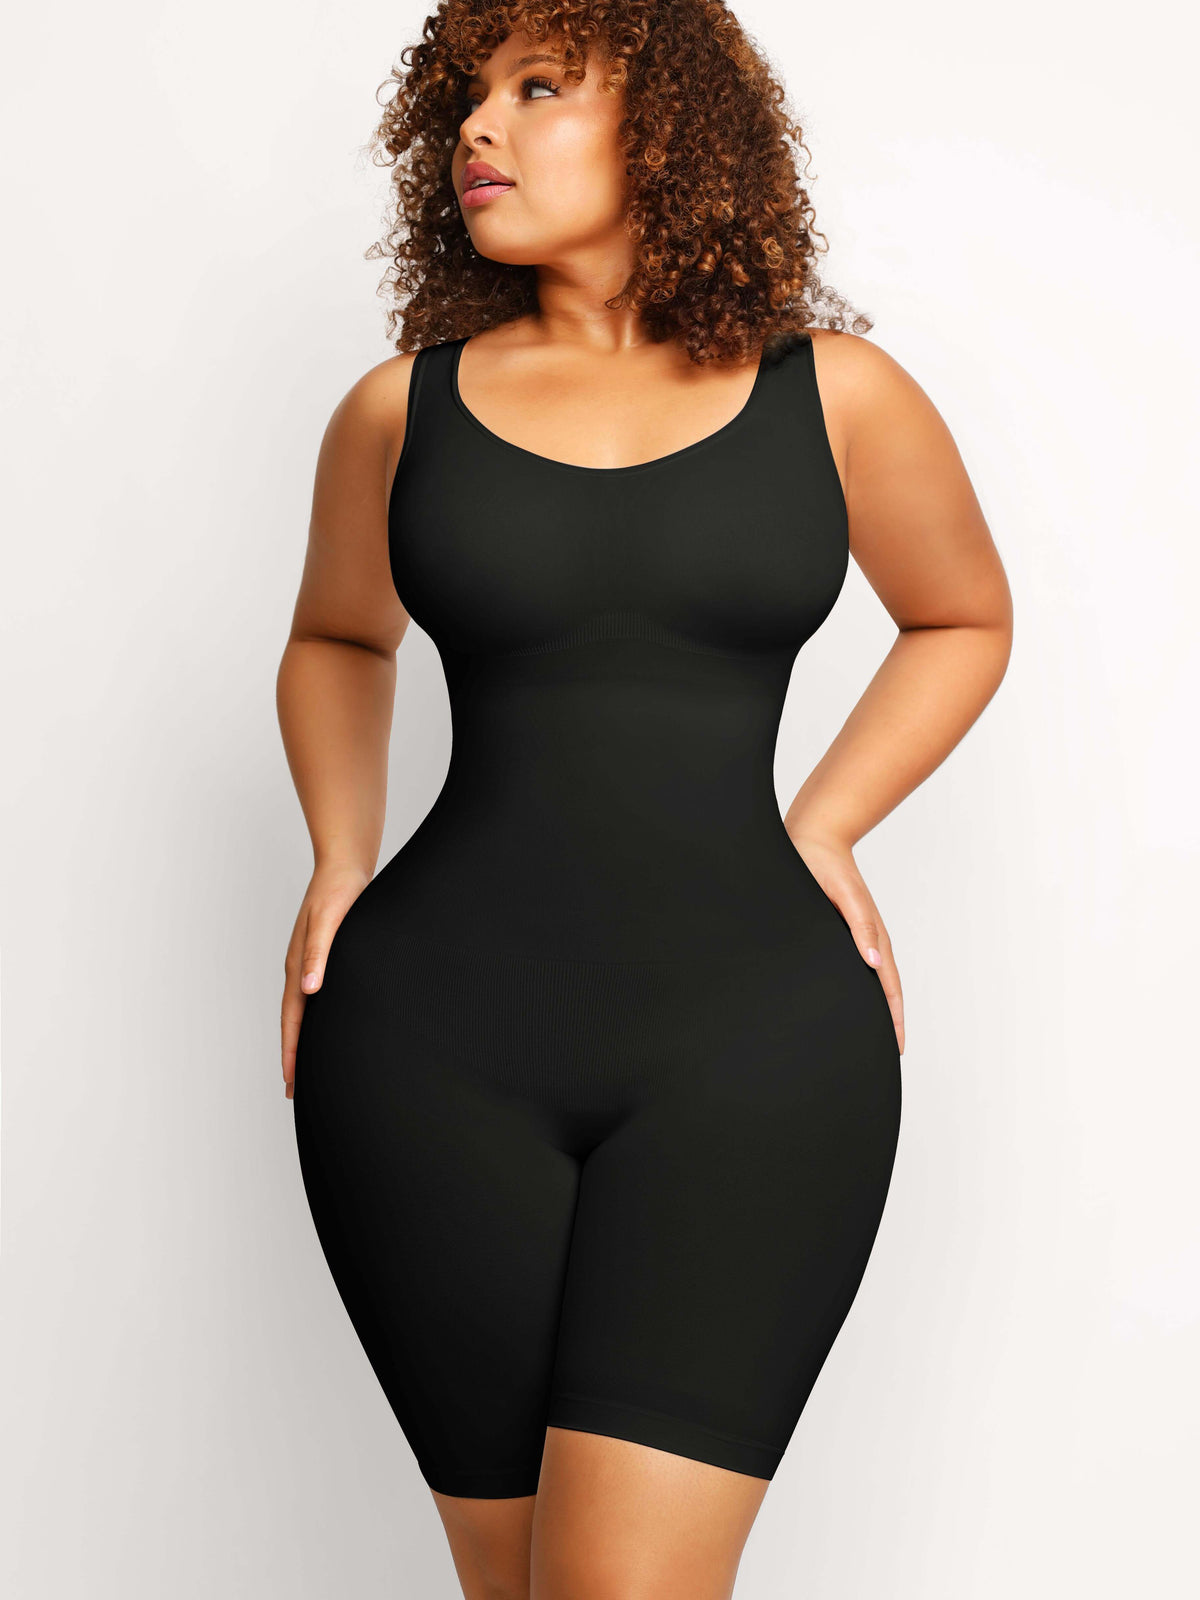 Happy Black Friday! If you're shopping for SHAPEWEAR I've found a